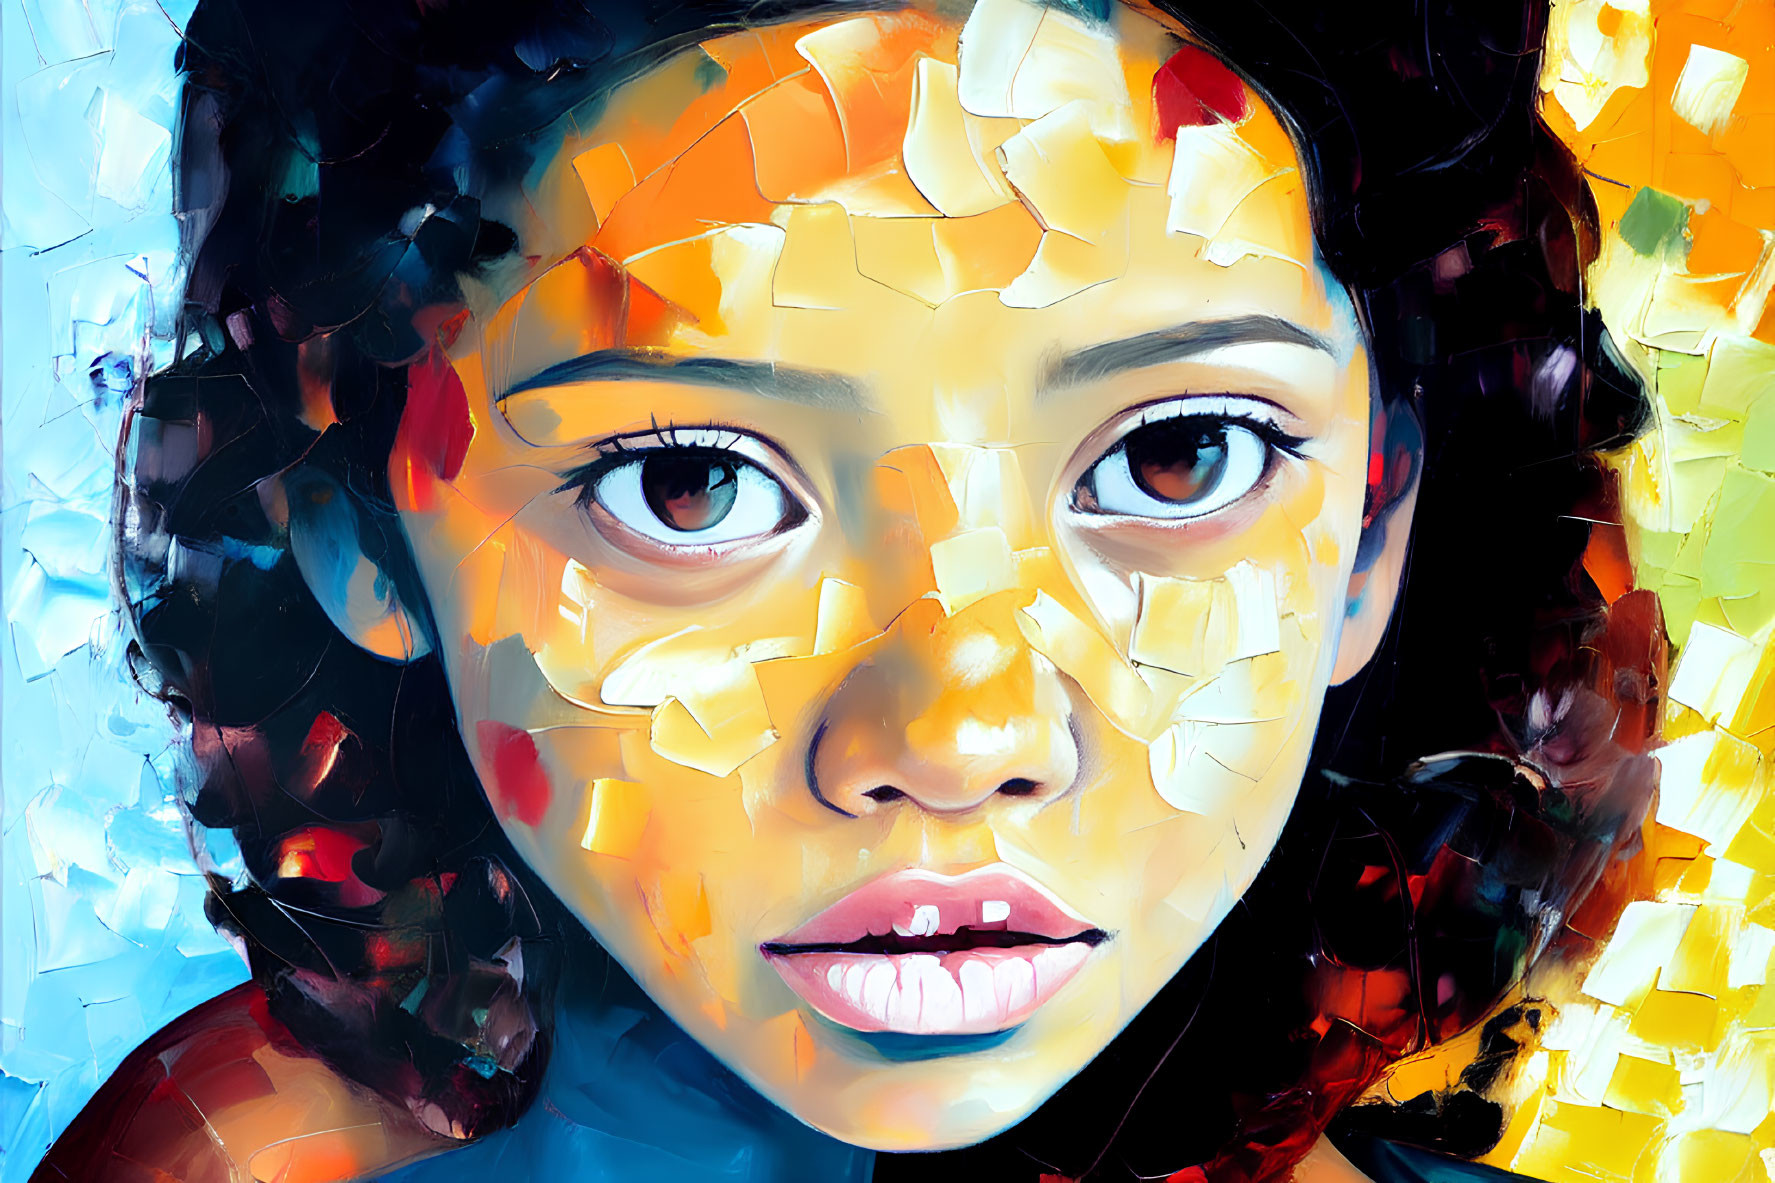 Vibrant abstract portrait of a young girl with cubist influences